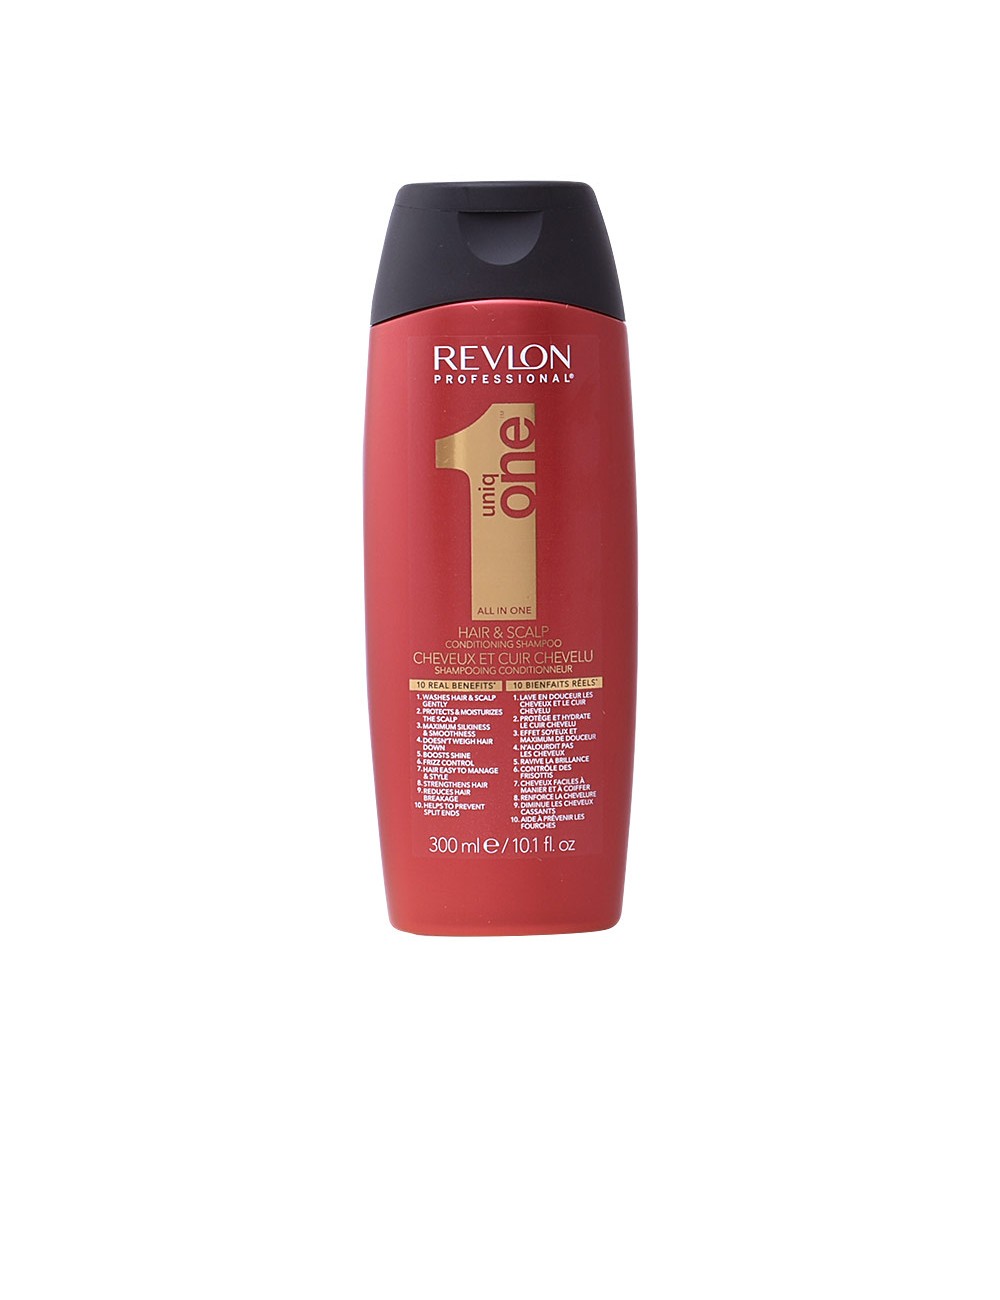 UNIQ ONE all in one hair&scalp conditioning shampoo